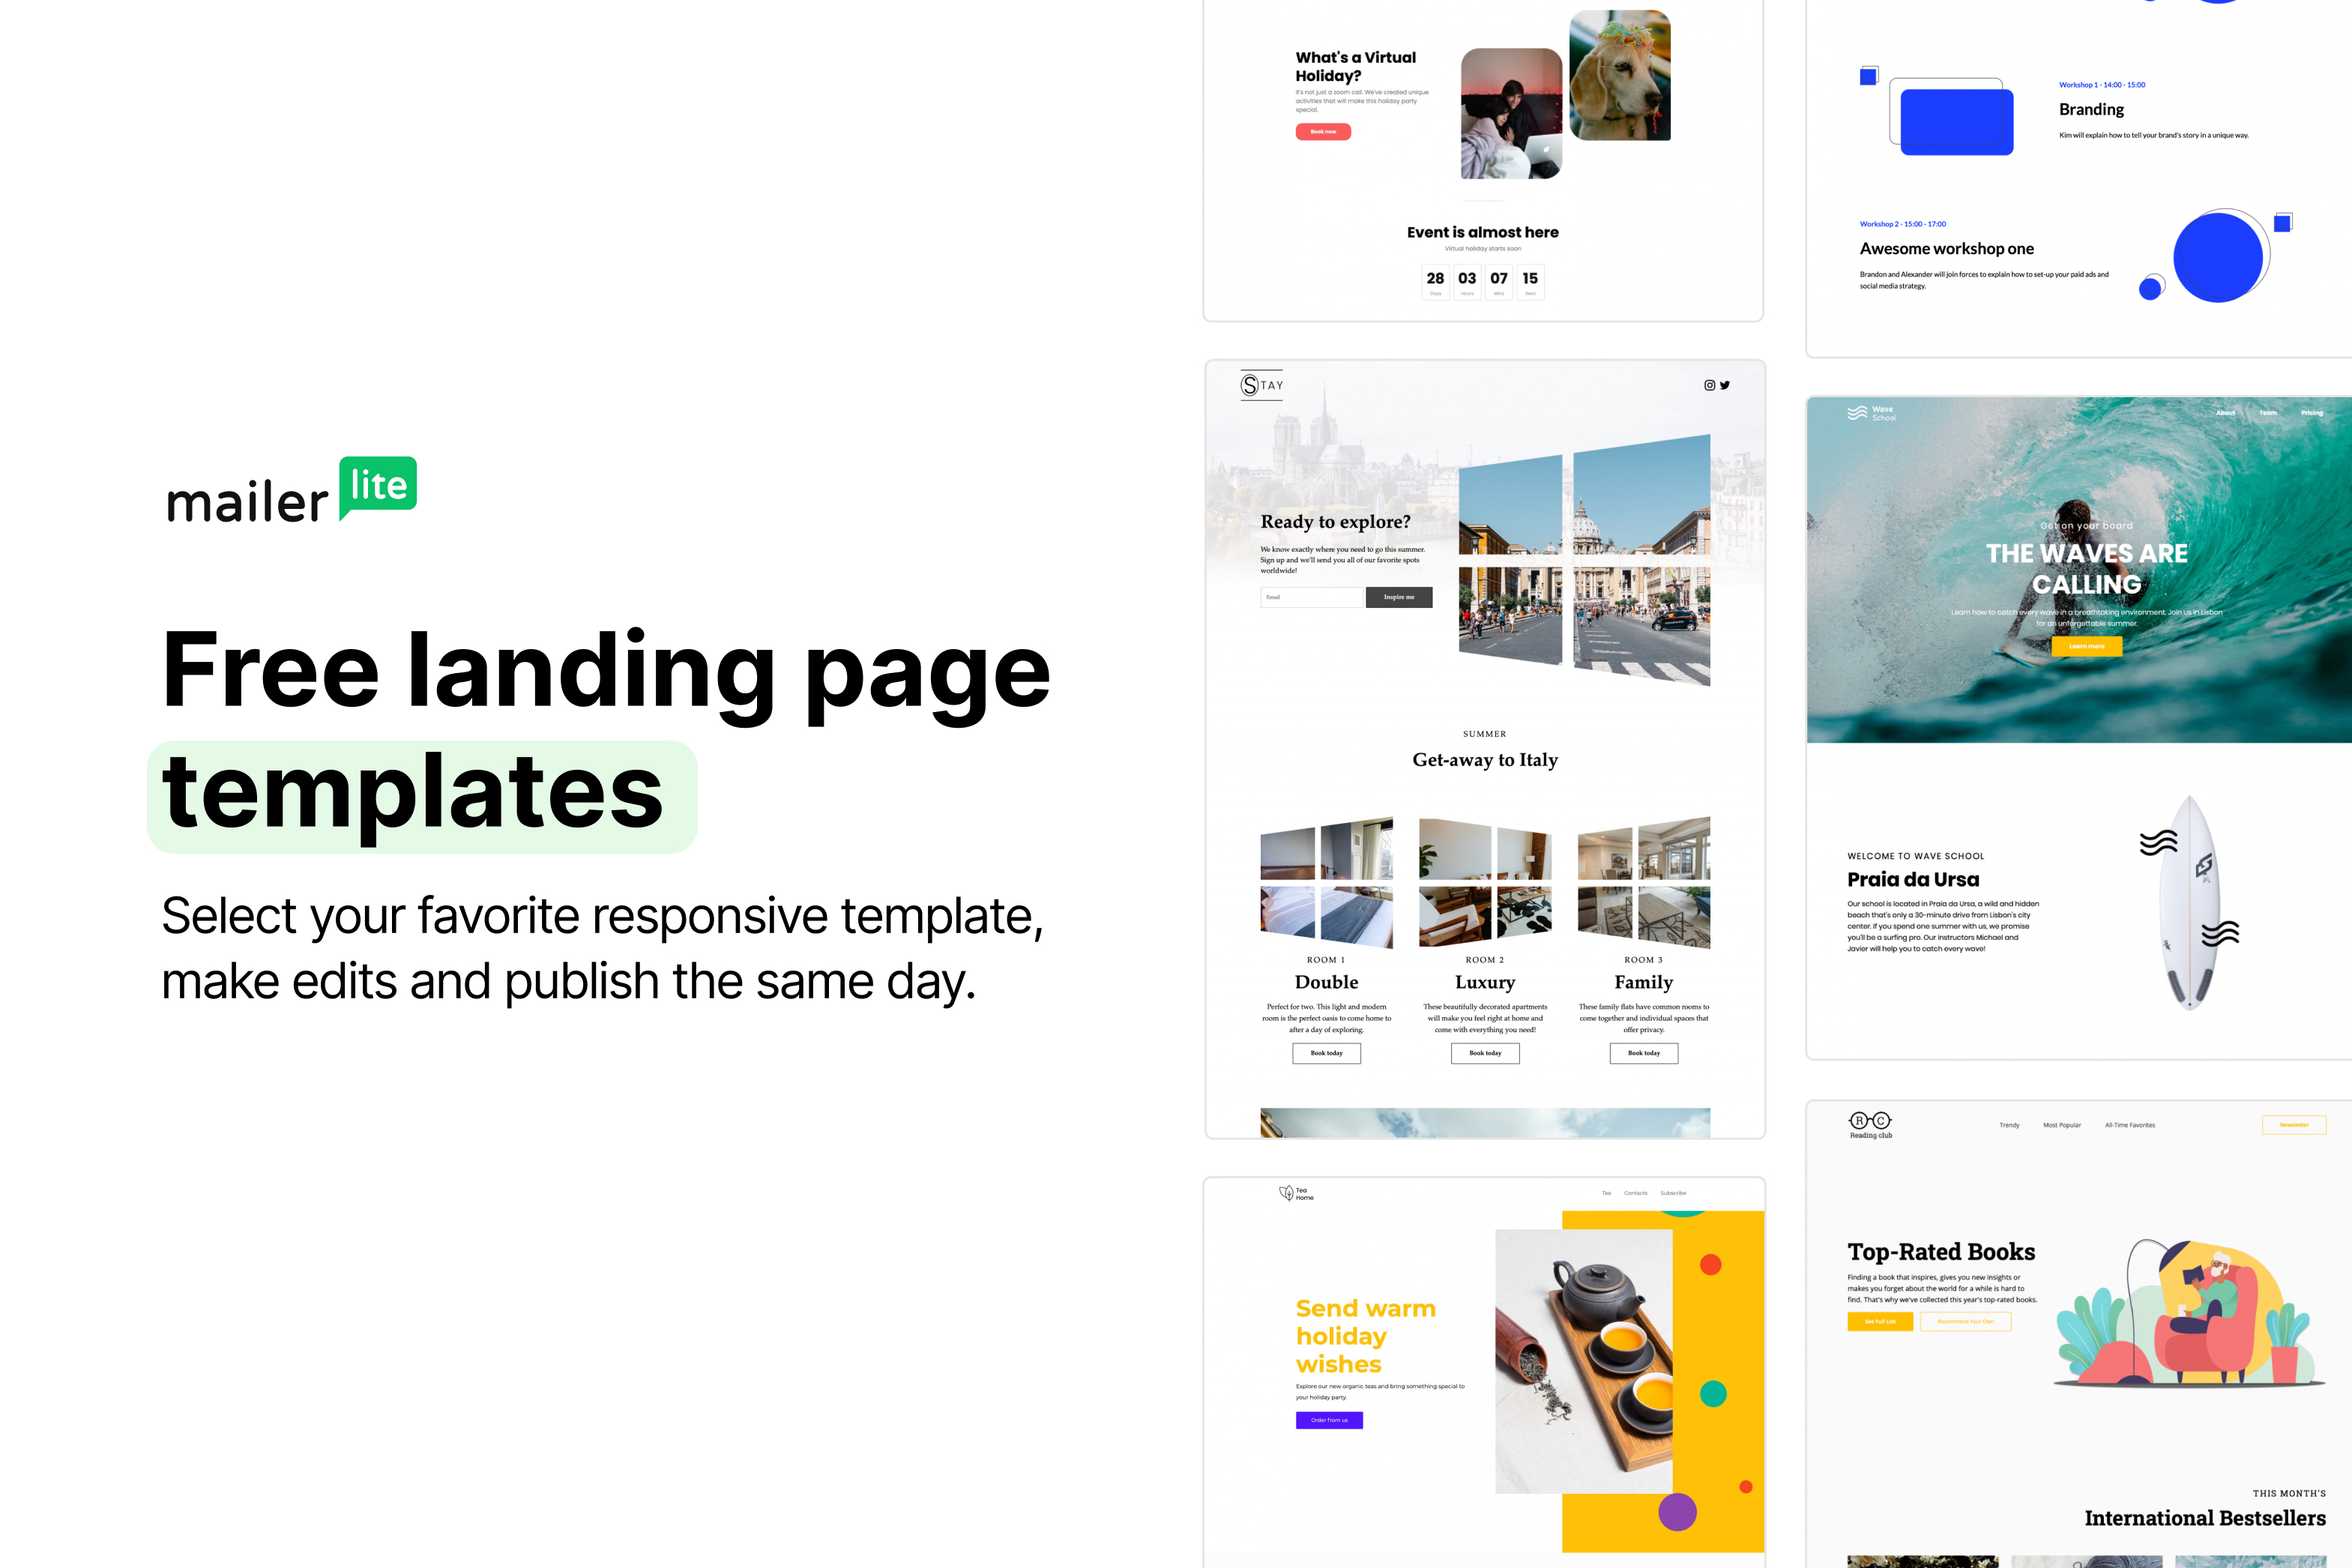 Mobile-friendly landing page templates